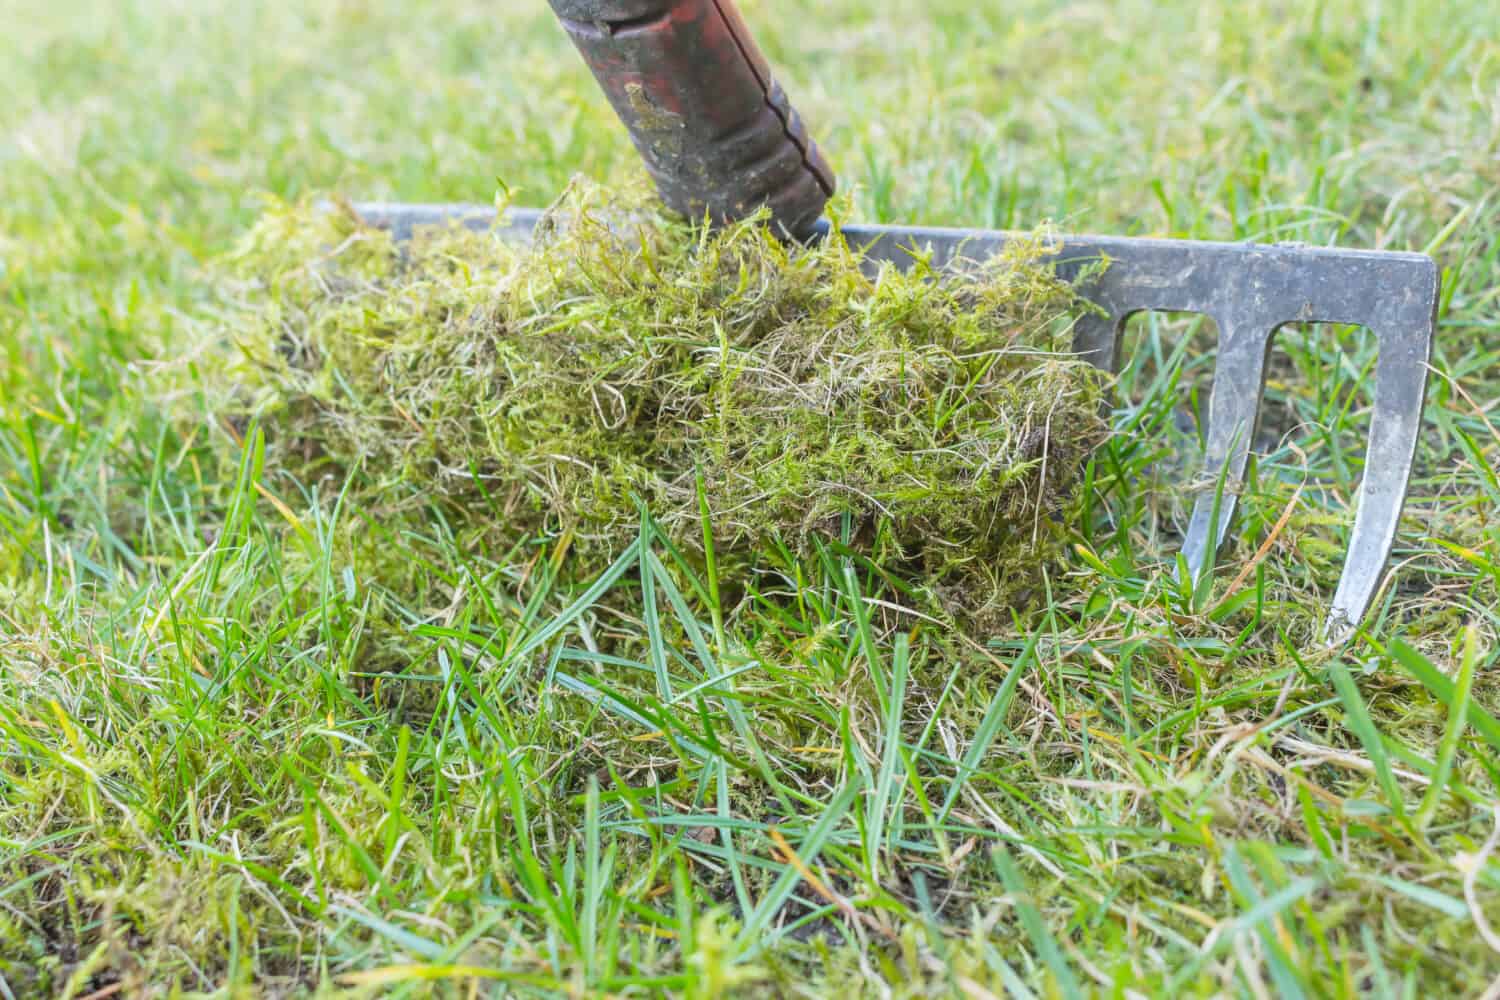 Removing old moss and dead grass from the lawn. Aerating and improving the lawn quality.